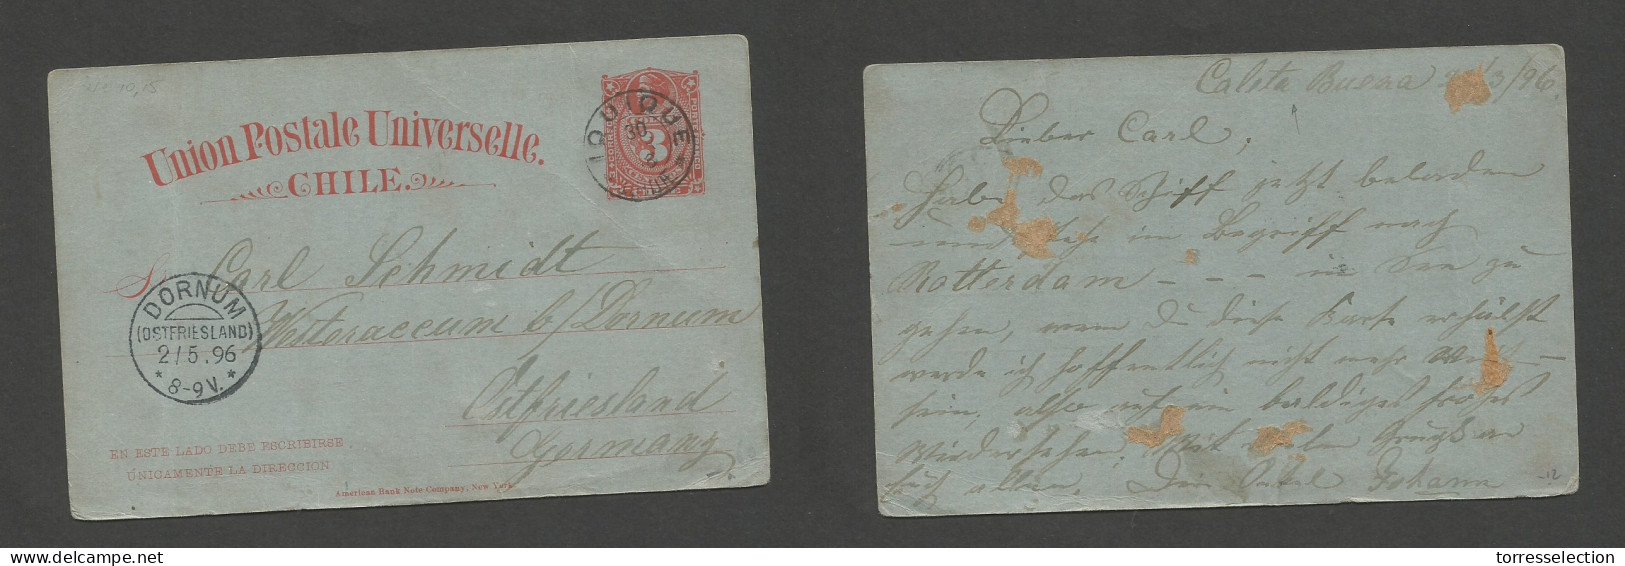 CHILE - Stationery. 1896 (22 March) Caleta Buena - Germany, Dorrum (2 May) Via Iquique (30 March) 3c Red / Bluish Stat C - Cile